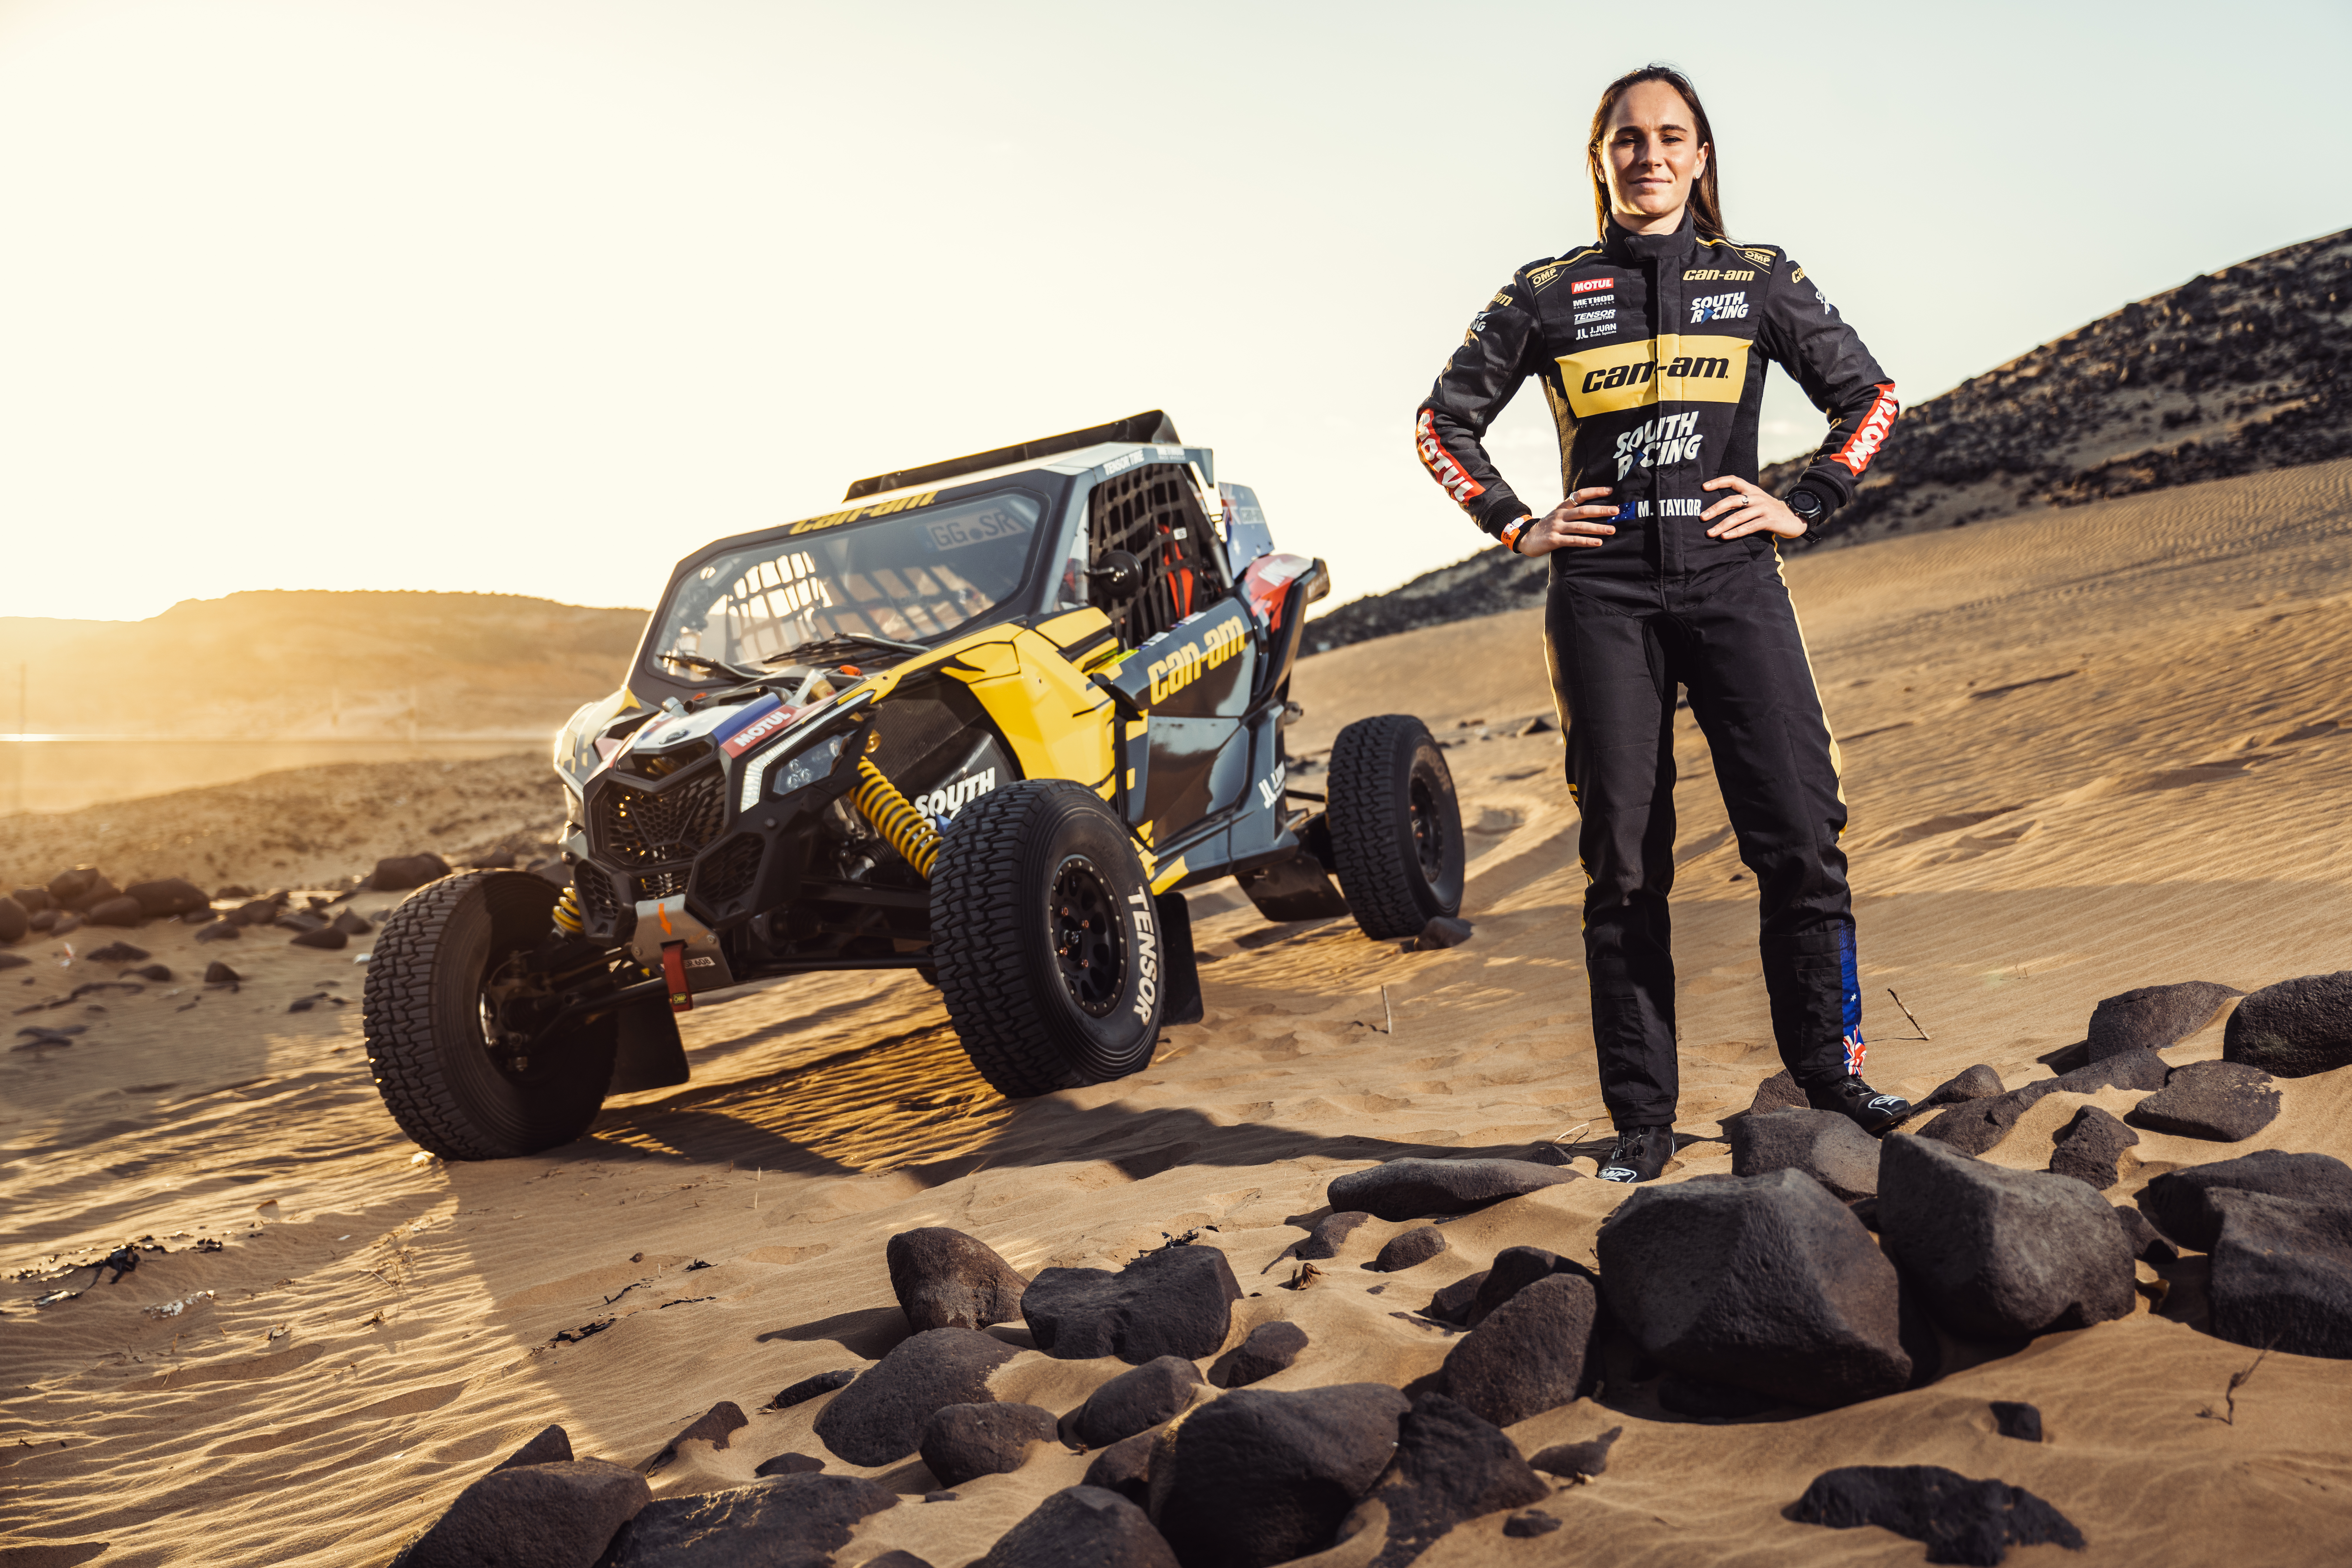 CAN-AM MAVERICK X3 TAKES HOME THE DAKAR RALLY CHAMPIONSHIP FOR THE 5TH CONSECUTIVE YEAR!